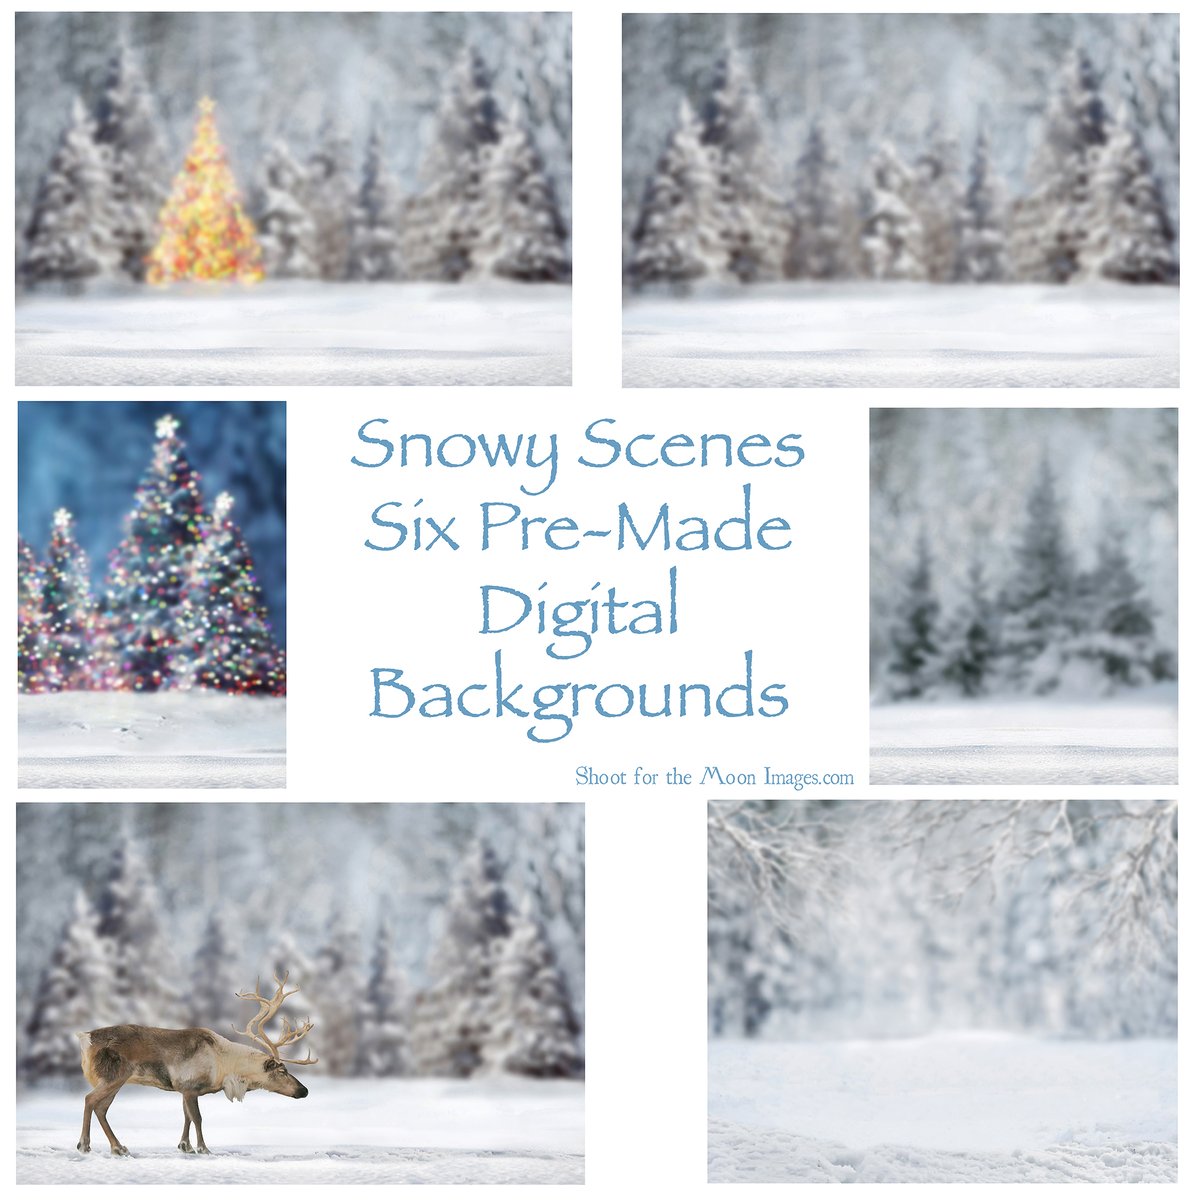 Image of Snowy Scenes Digital Backgrounds